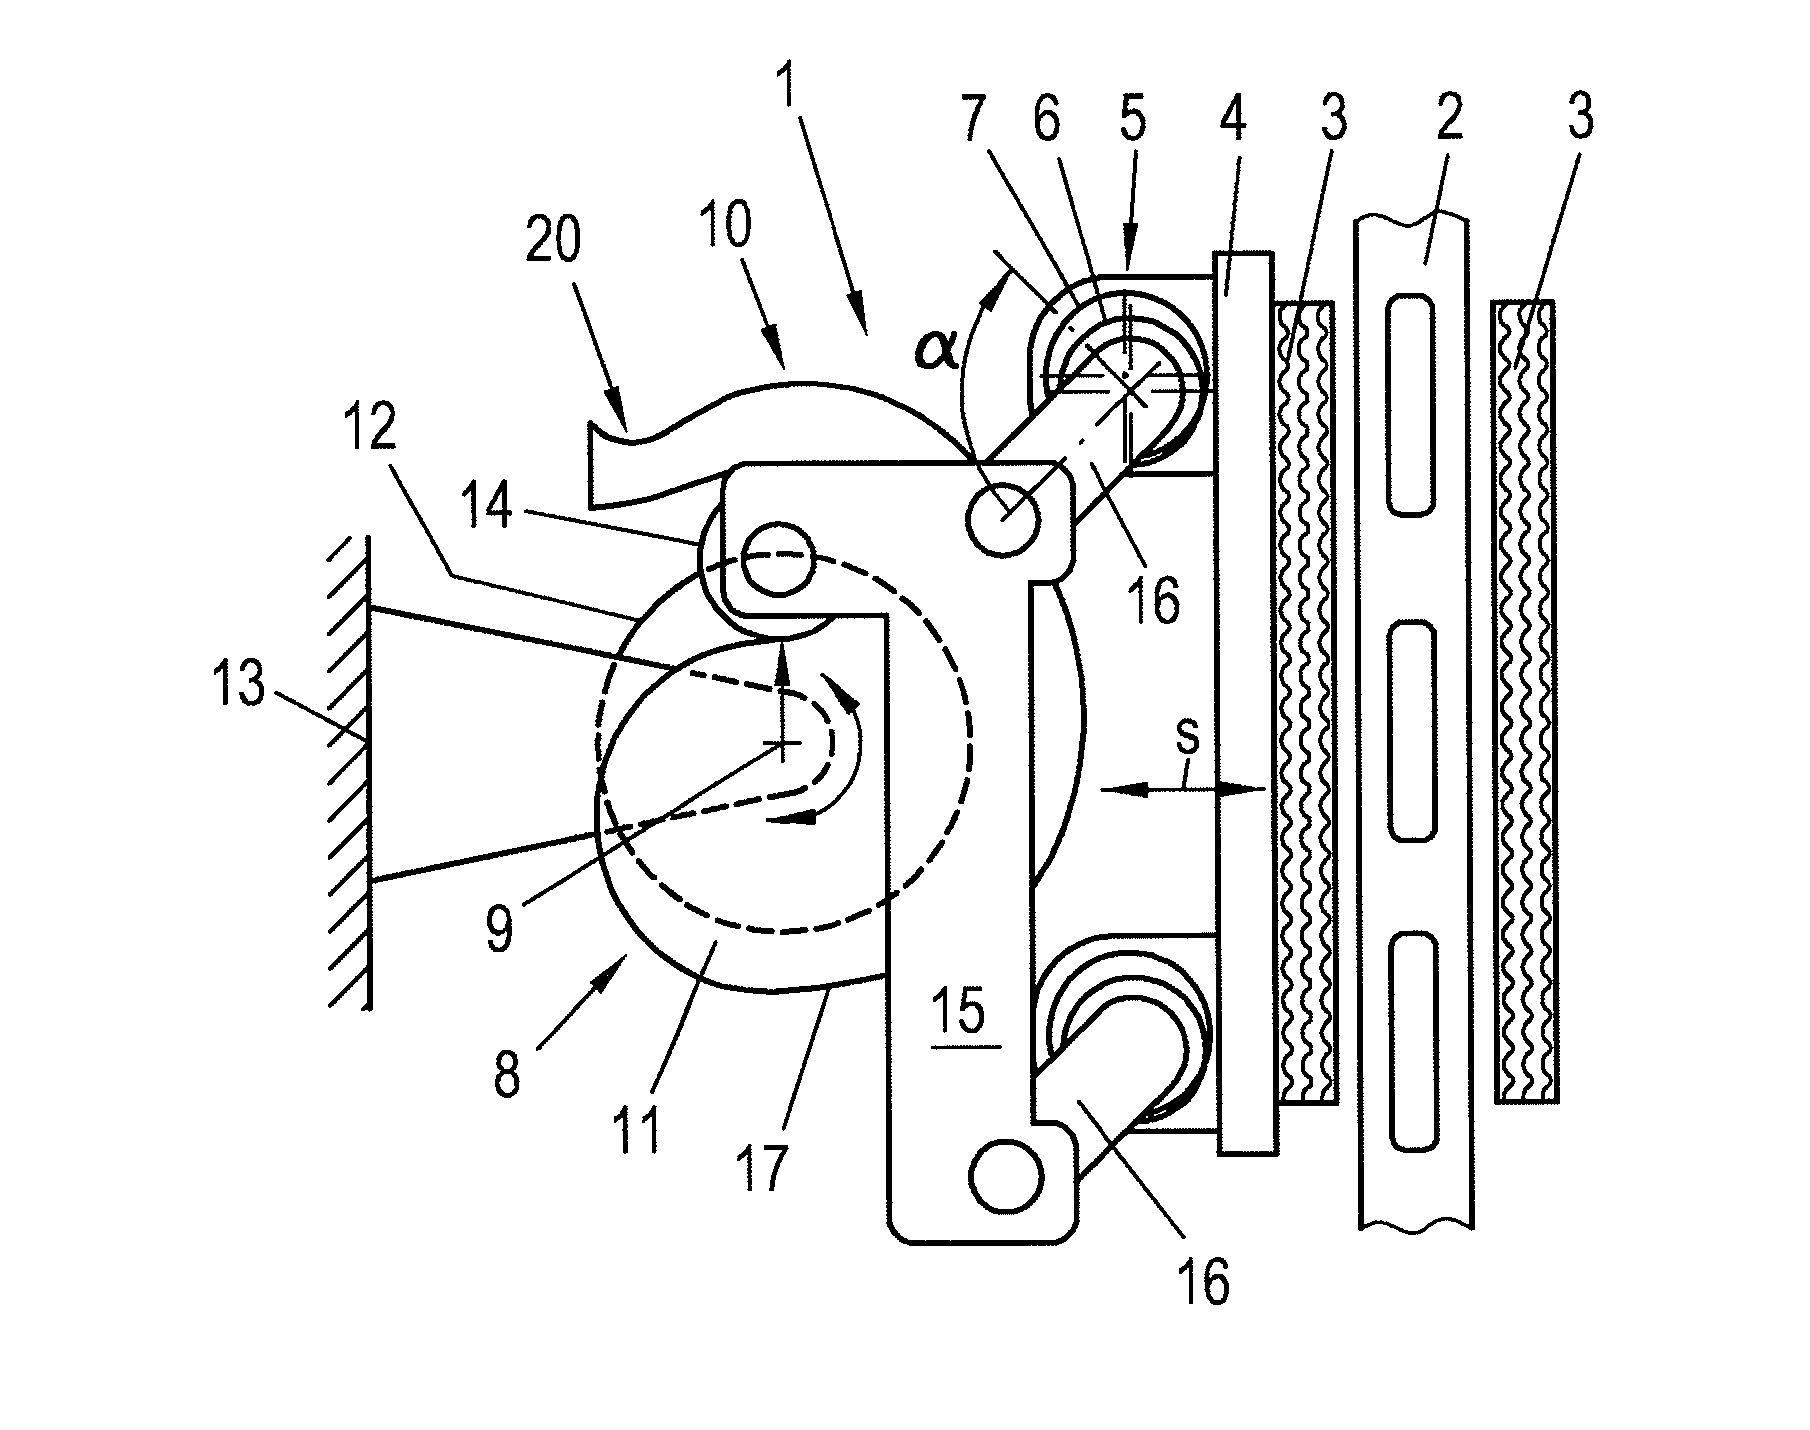 Electrically actuated friction brake